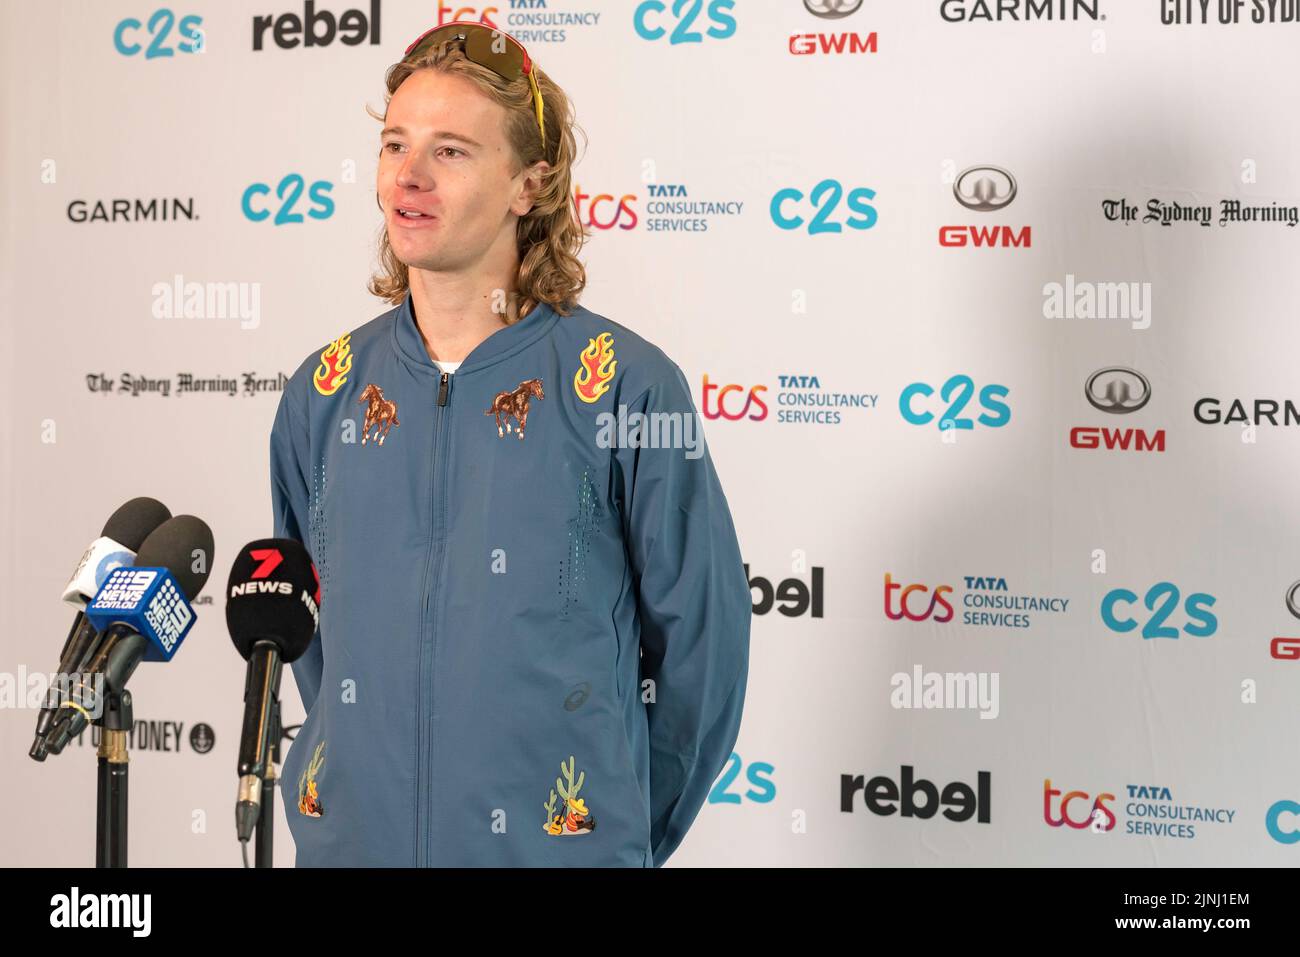 Sydney, Australia.12 August 2022: Elite distance runner and one of the race favourites, Ed Goddard, at a press conference prior to the 50th City2Surf race in Sydney on Sunday. This will be the first race since 2019 after cancellations in 2020 and 21 due to Covid-19. 60,000+ people are expected cover the fourteen-kilometre race, the largest of its kind in the world. Mr Goddard urged participants to compete but also enjoy the 14km race and to take in the view as the route follows the harbour into the Eastern Suburbs. Credit: Stephen Dwyer / Alamy Live News Stock Photo